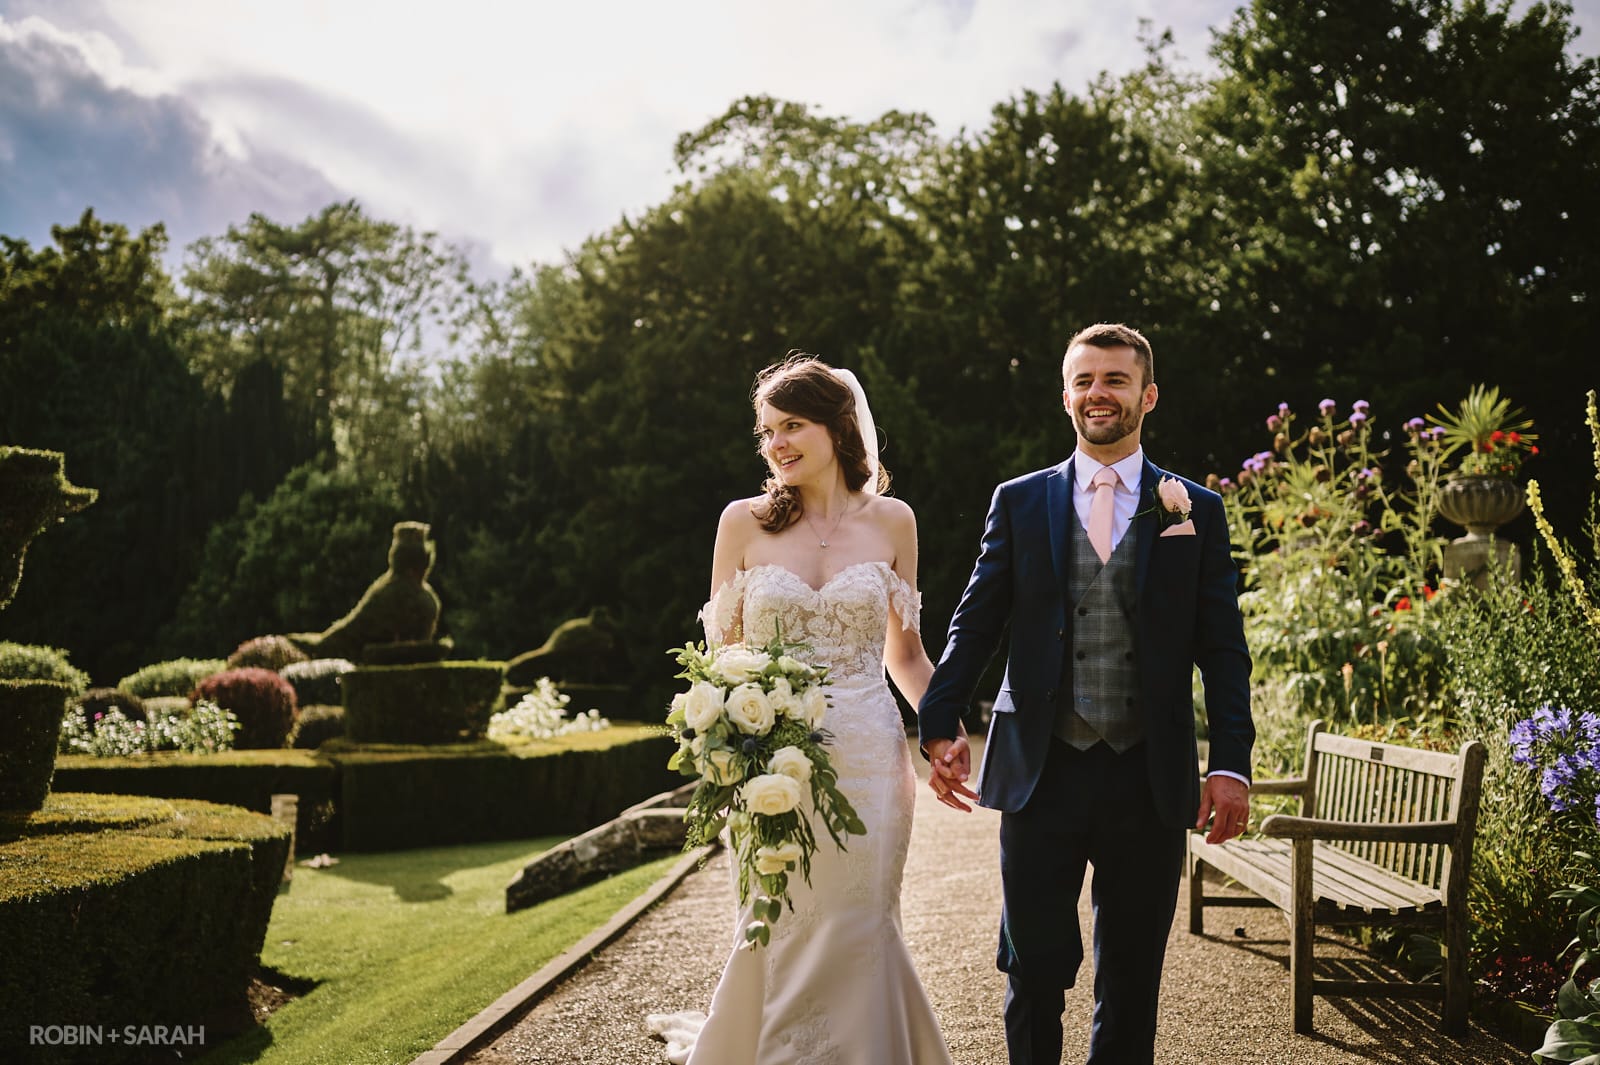 Bride and groom walking together in beautiful gardens